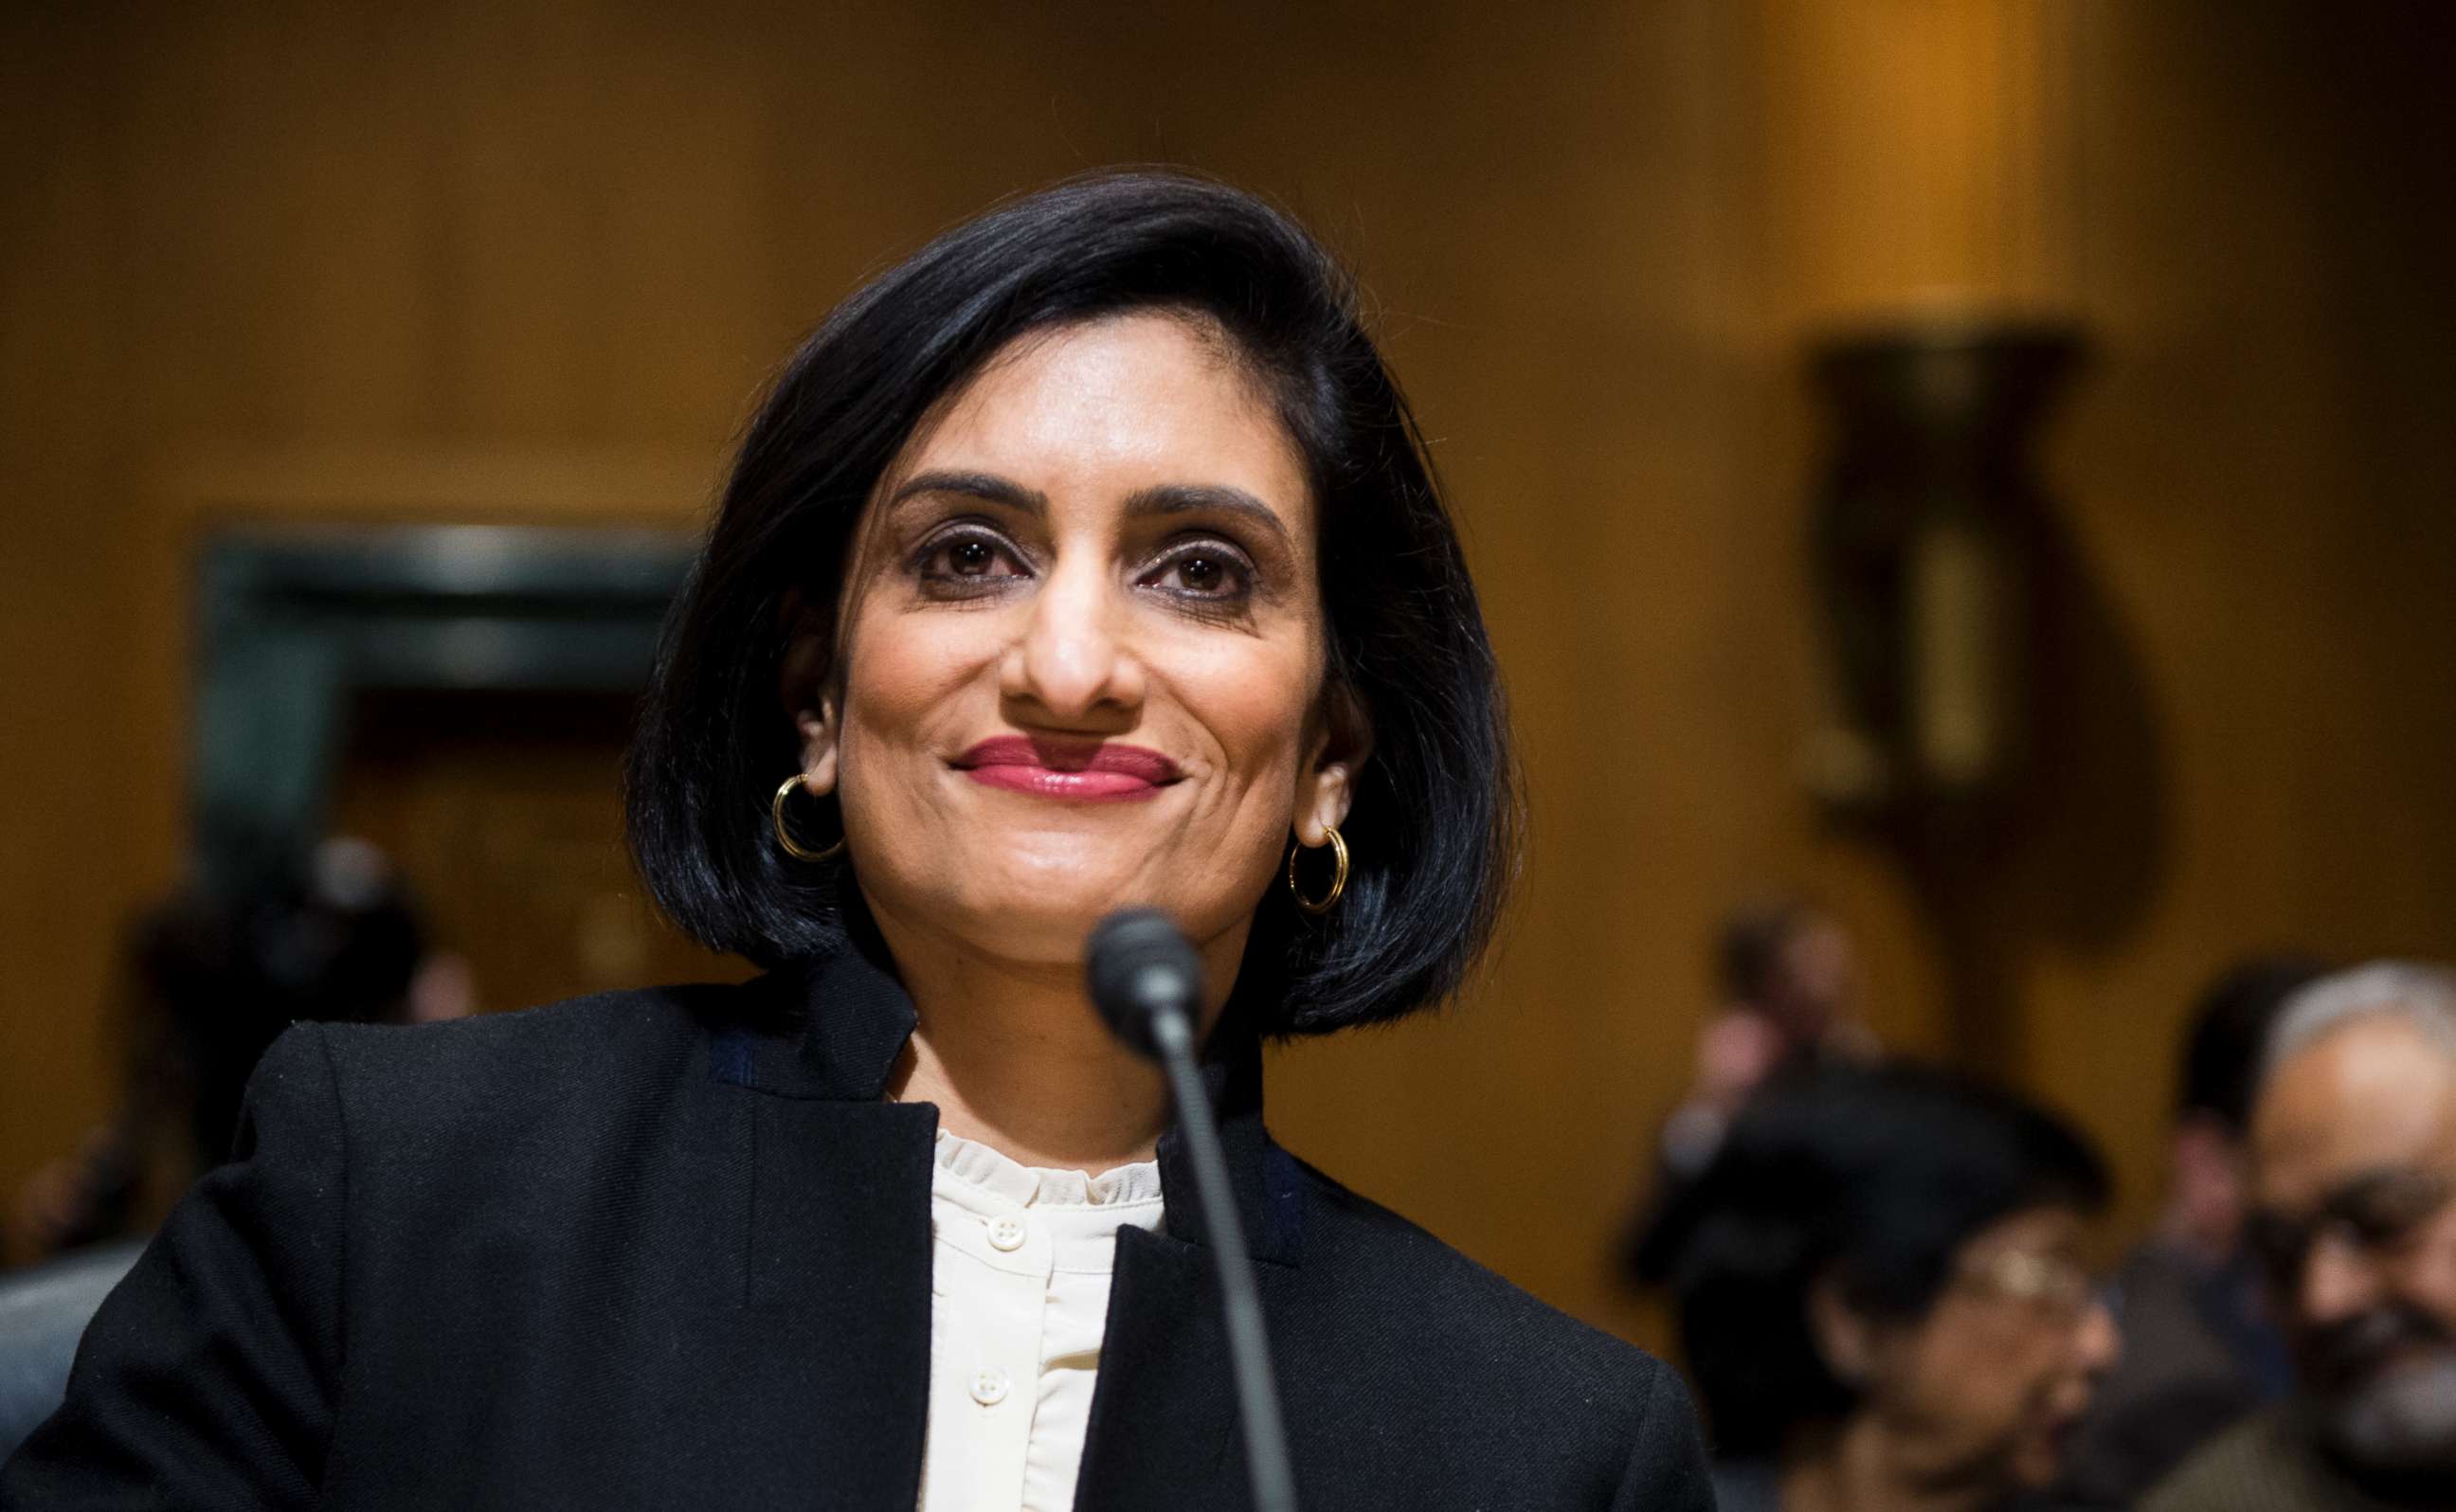 PHOTO: Seema Verma takes her seat to testify during her confirmation hearing for the position of Administrator of the Centers for Medicare and Medicaid Services, Feb. 16, 2017, in Washington D.C.